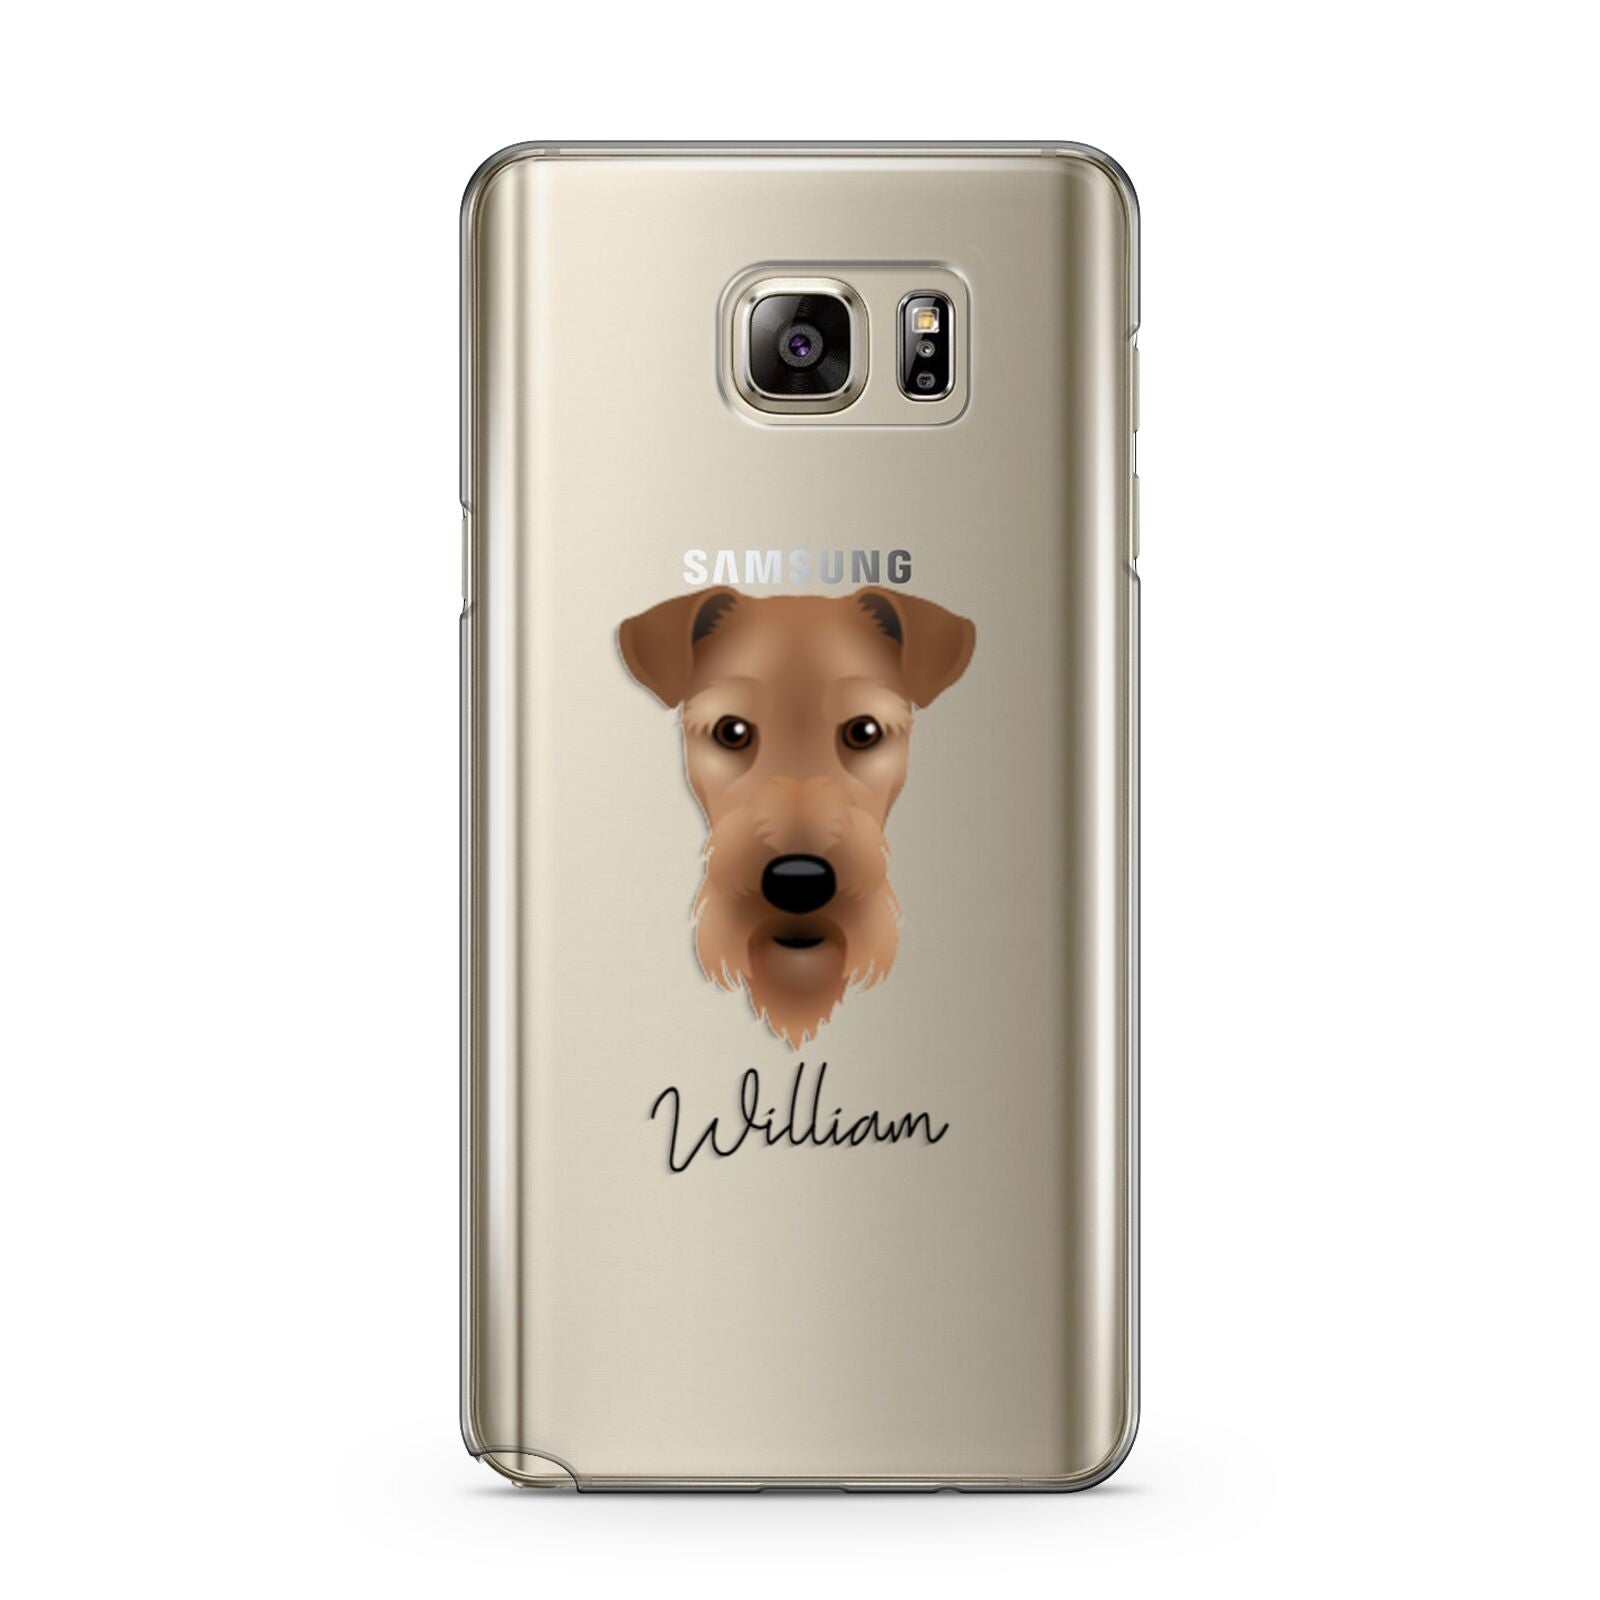 Airedale Terrier Personalised Samsung Galaxy Note 5 Case